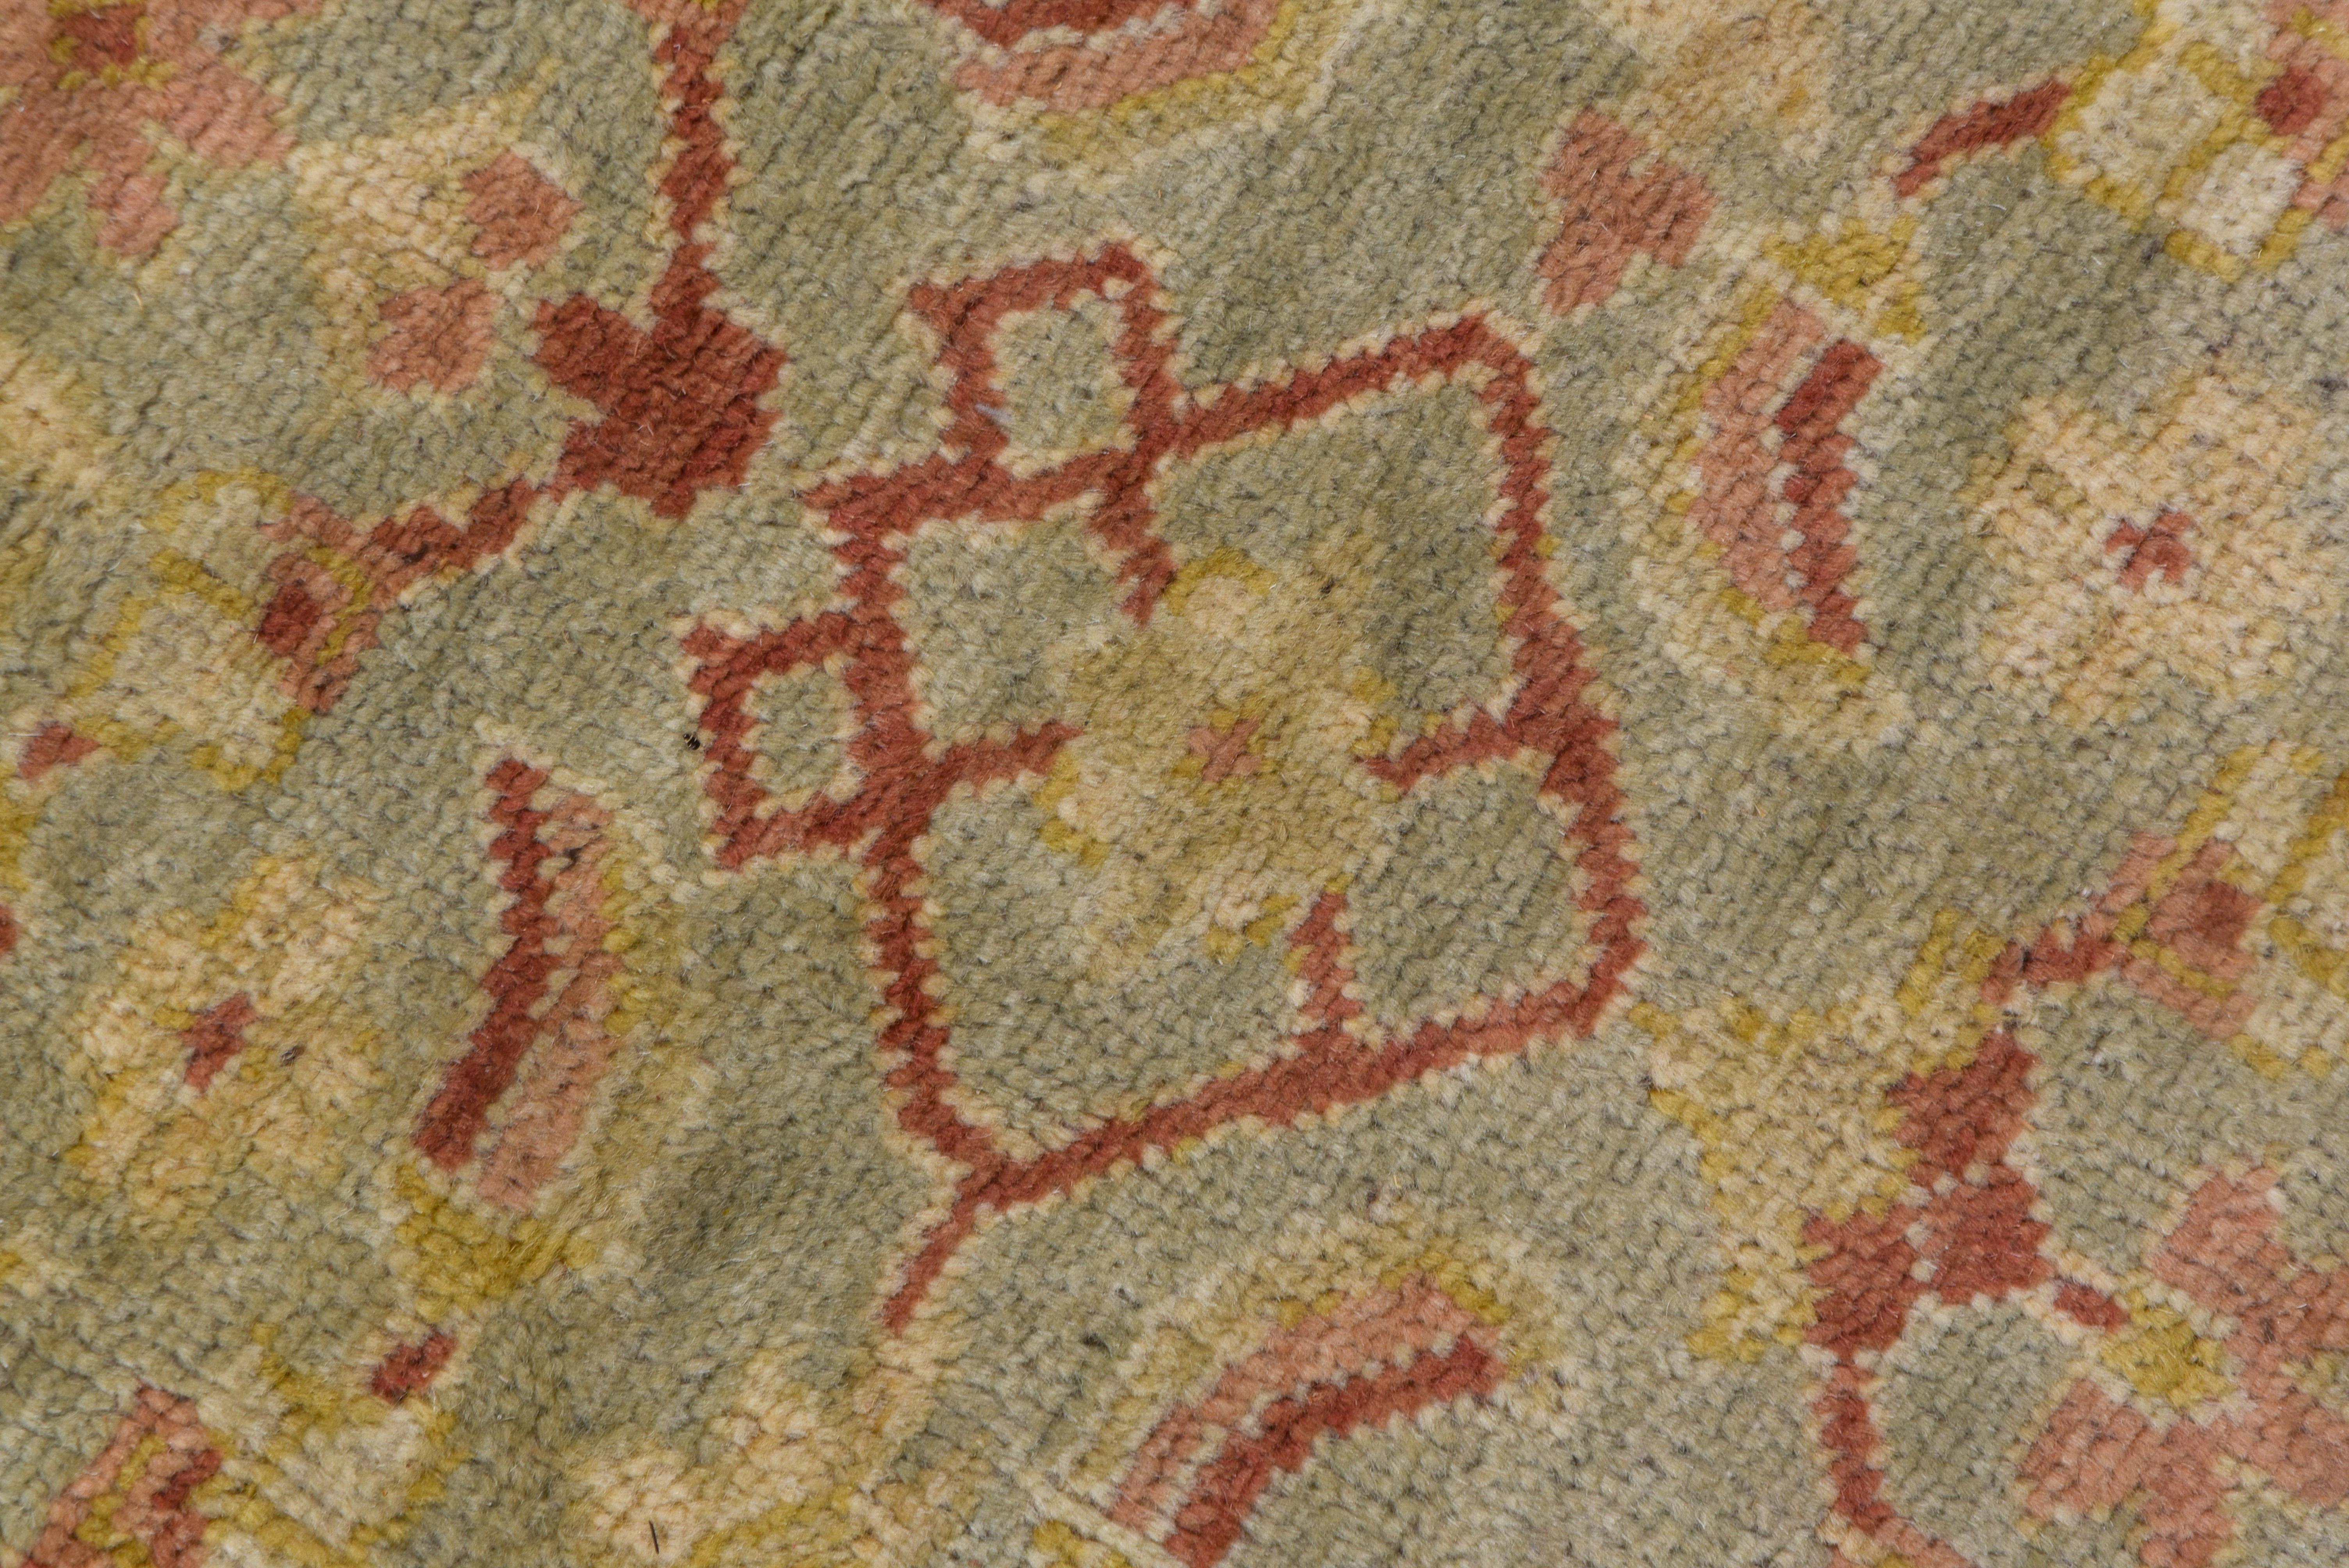 Wool Hand Knotted Indian Mahal Design Carpet, Seafoam Colored Field, Red Borders